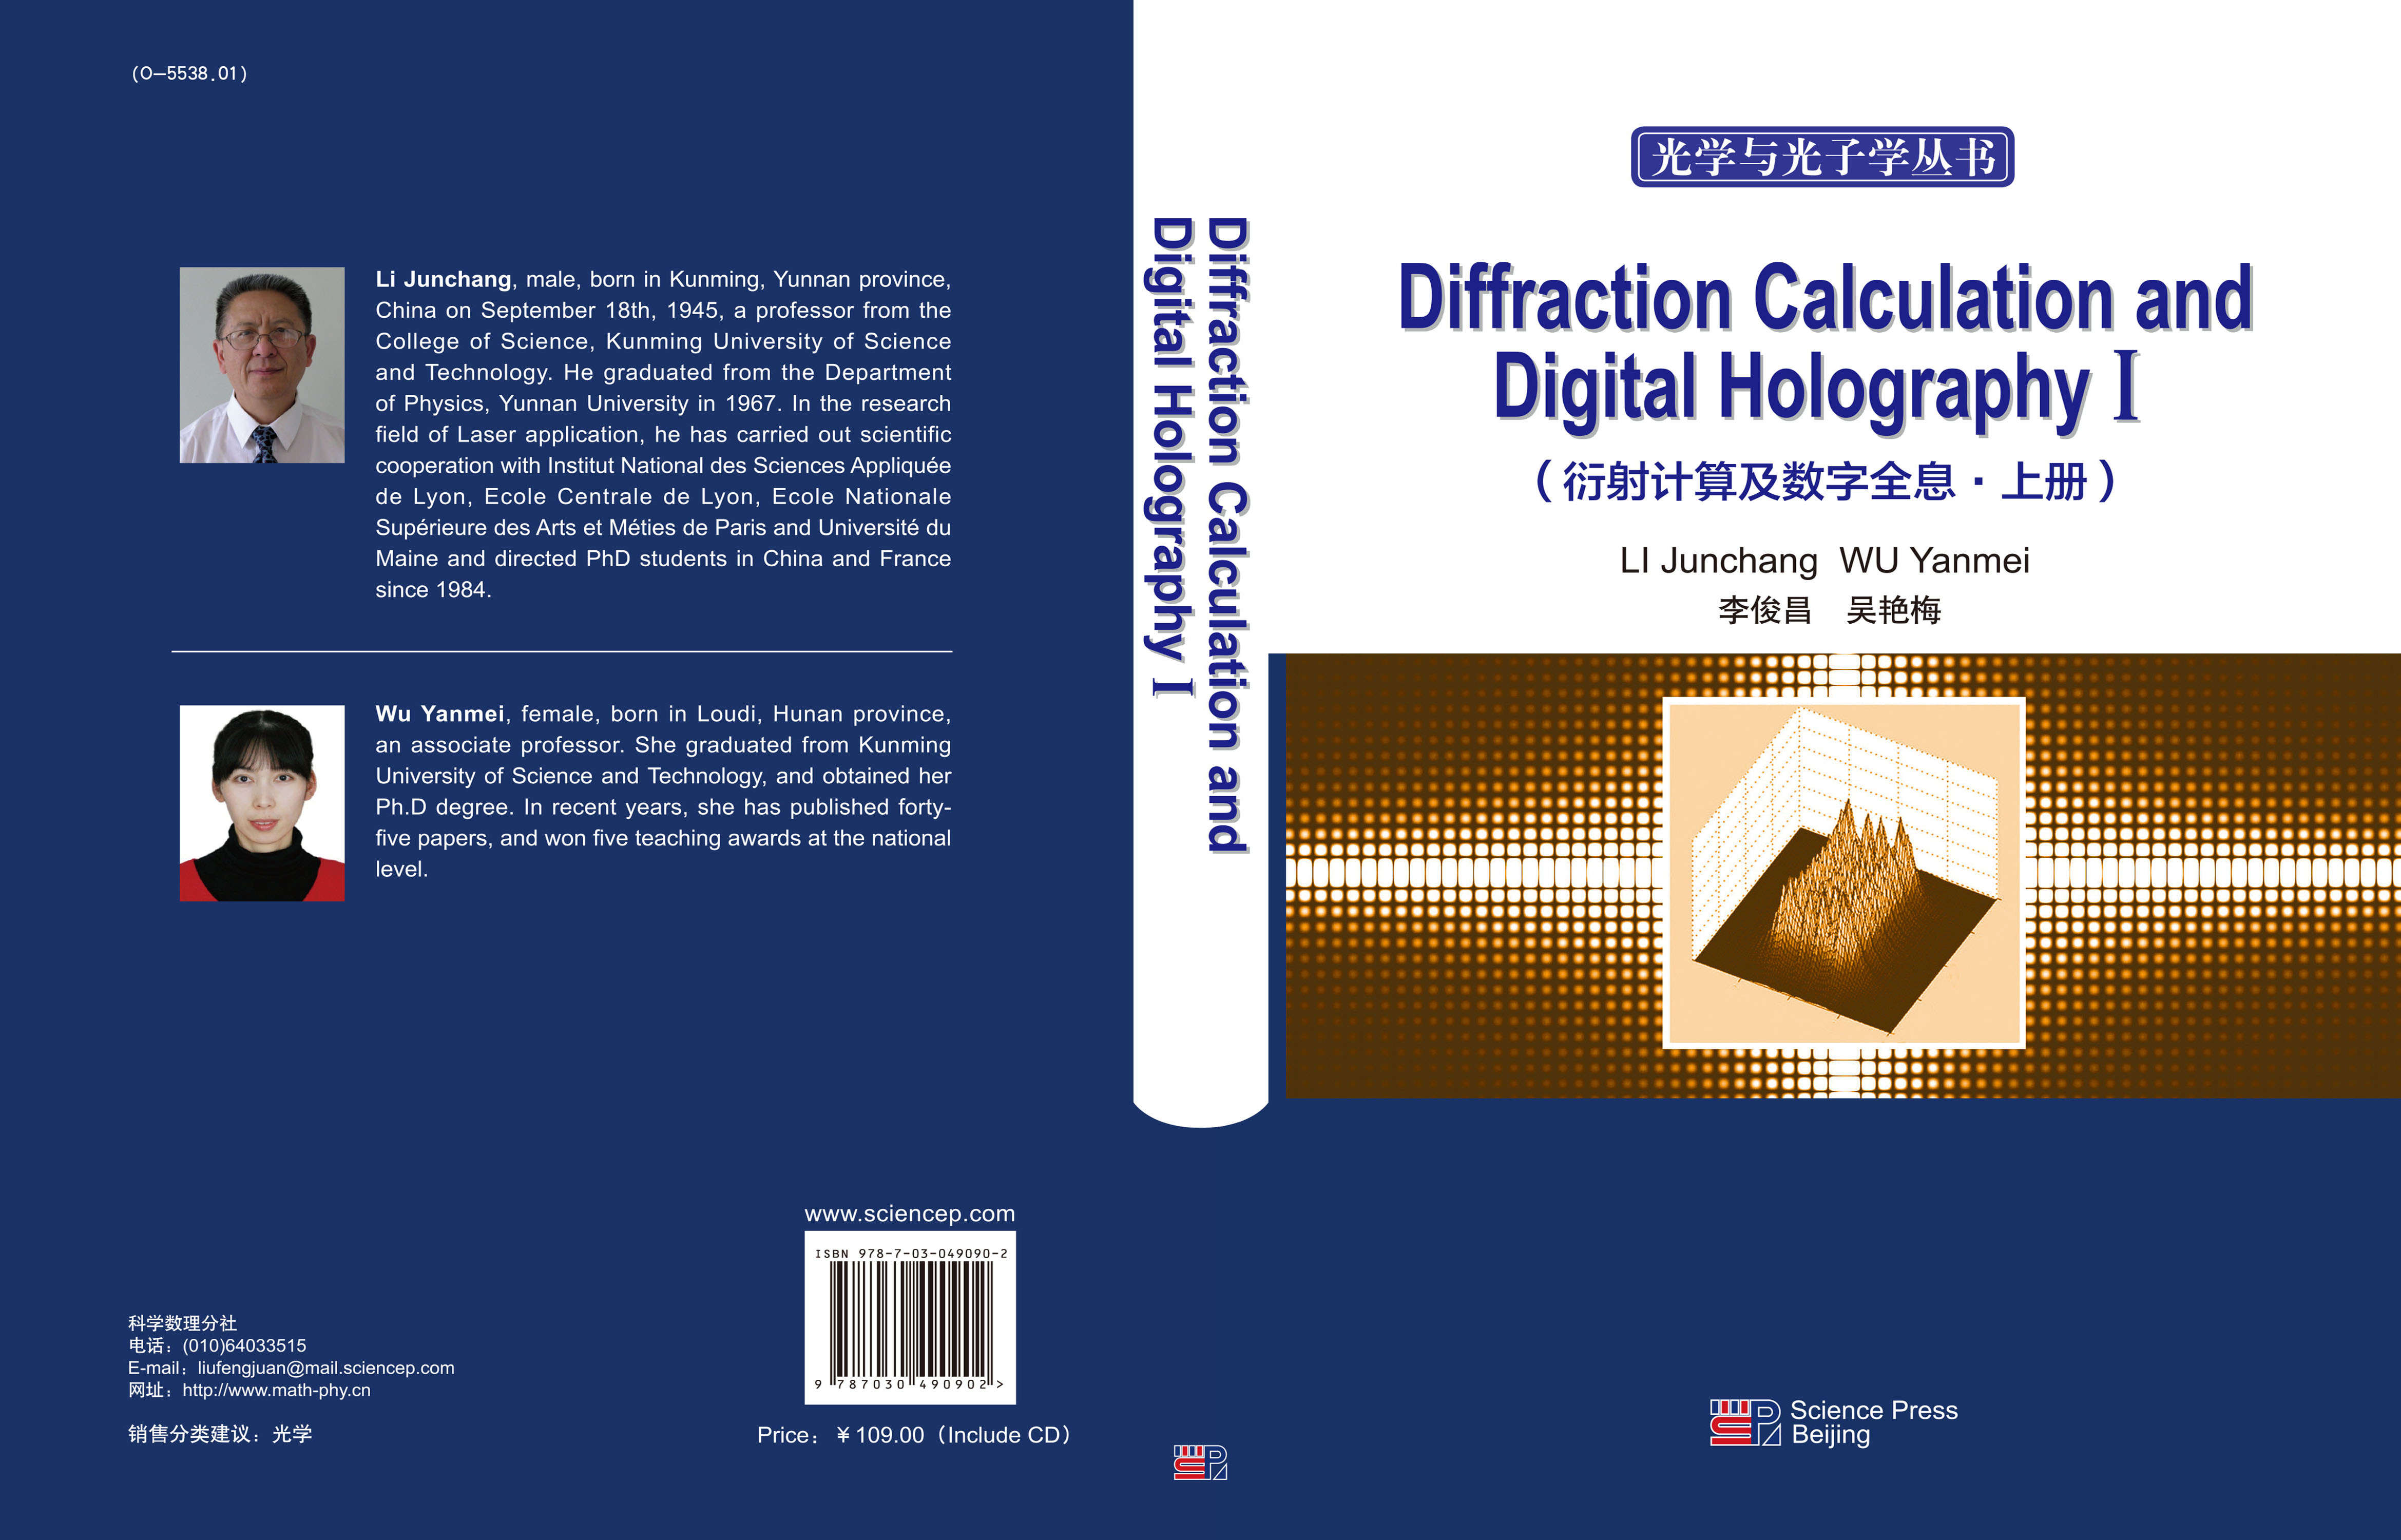 Diffraction Calculation and Digital Holography I